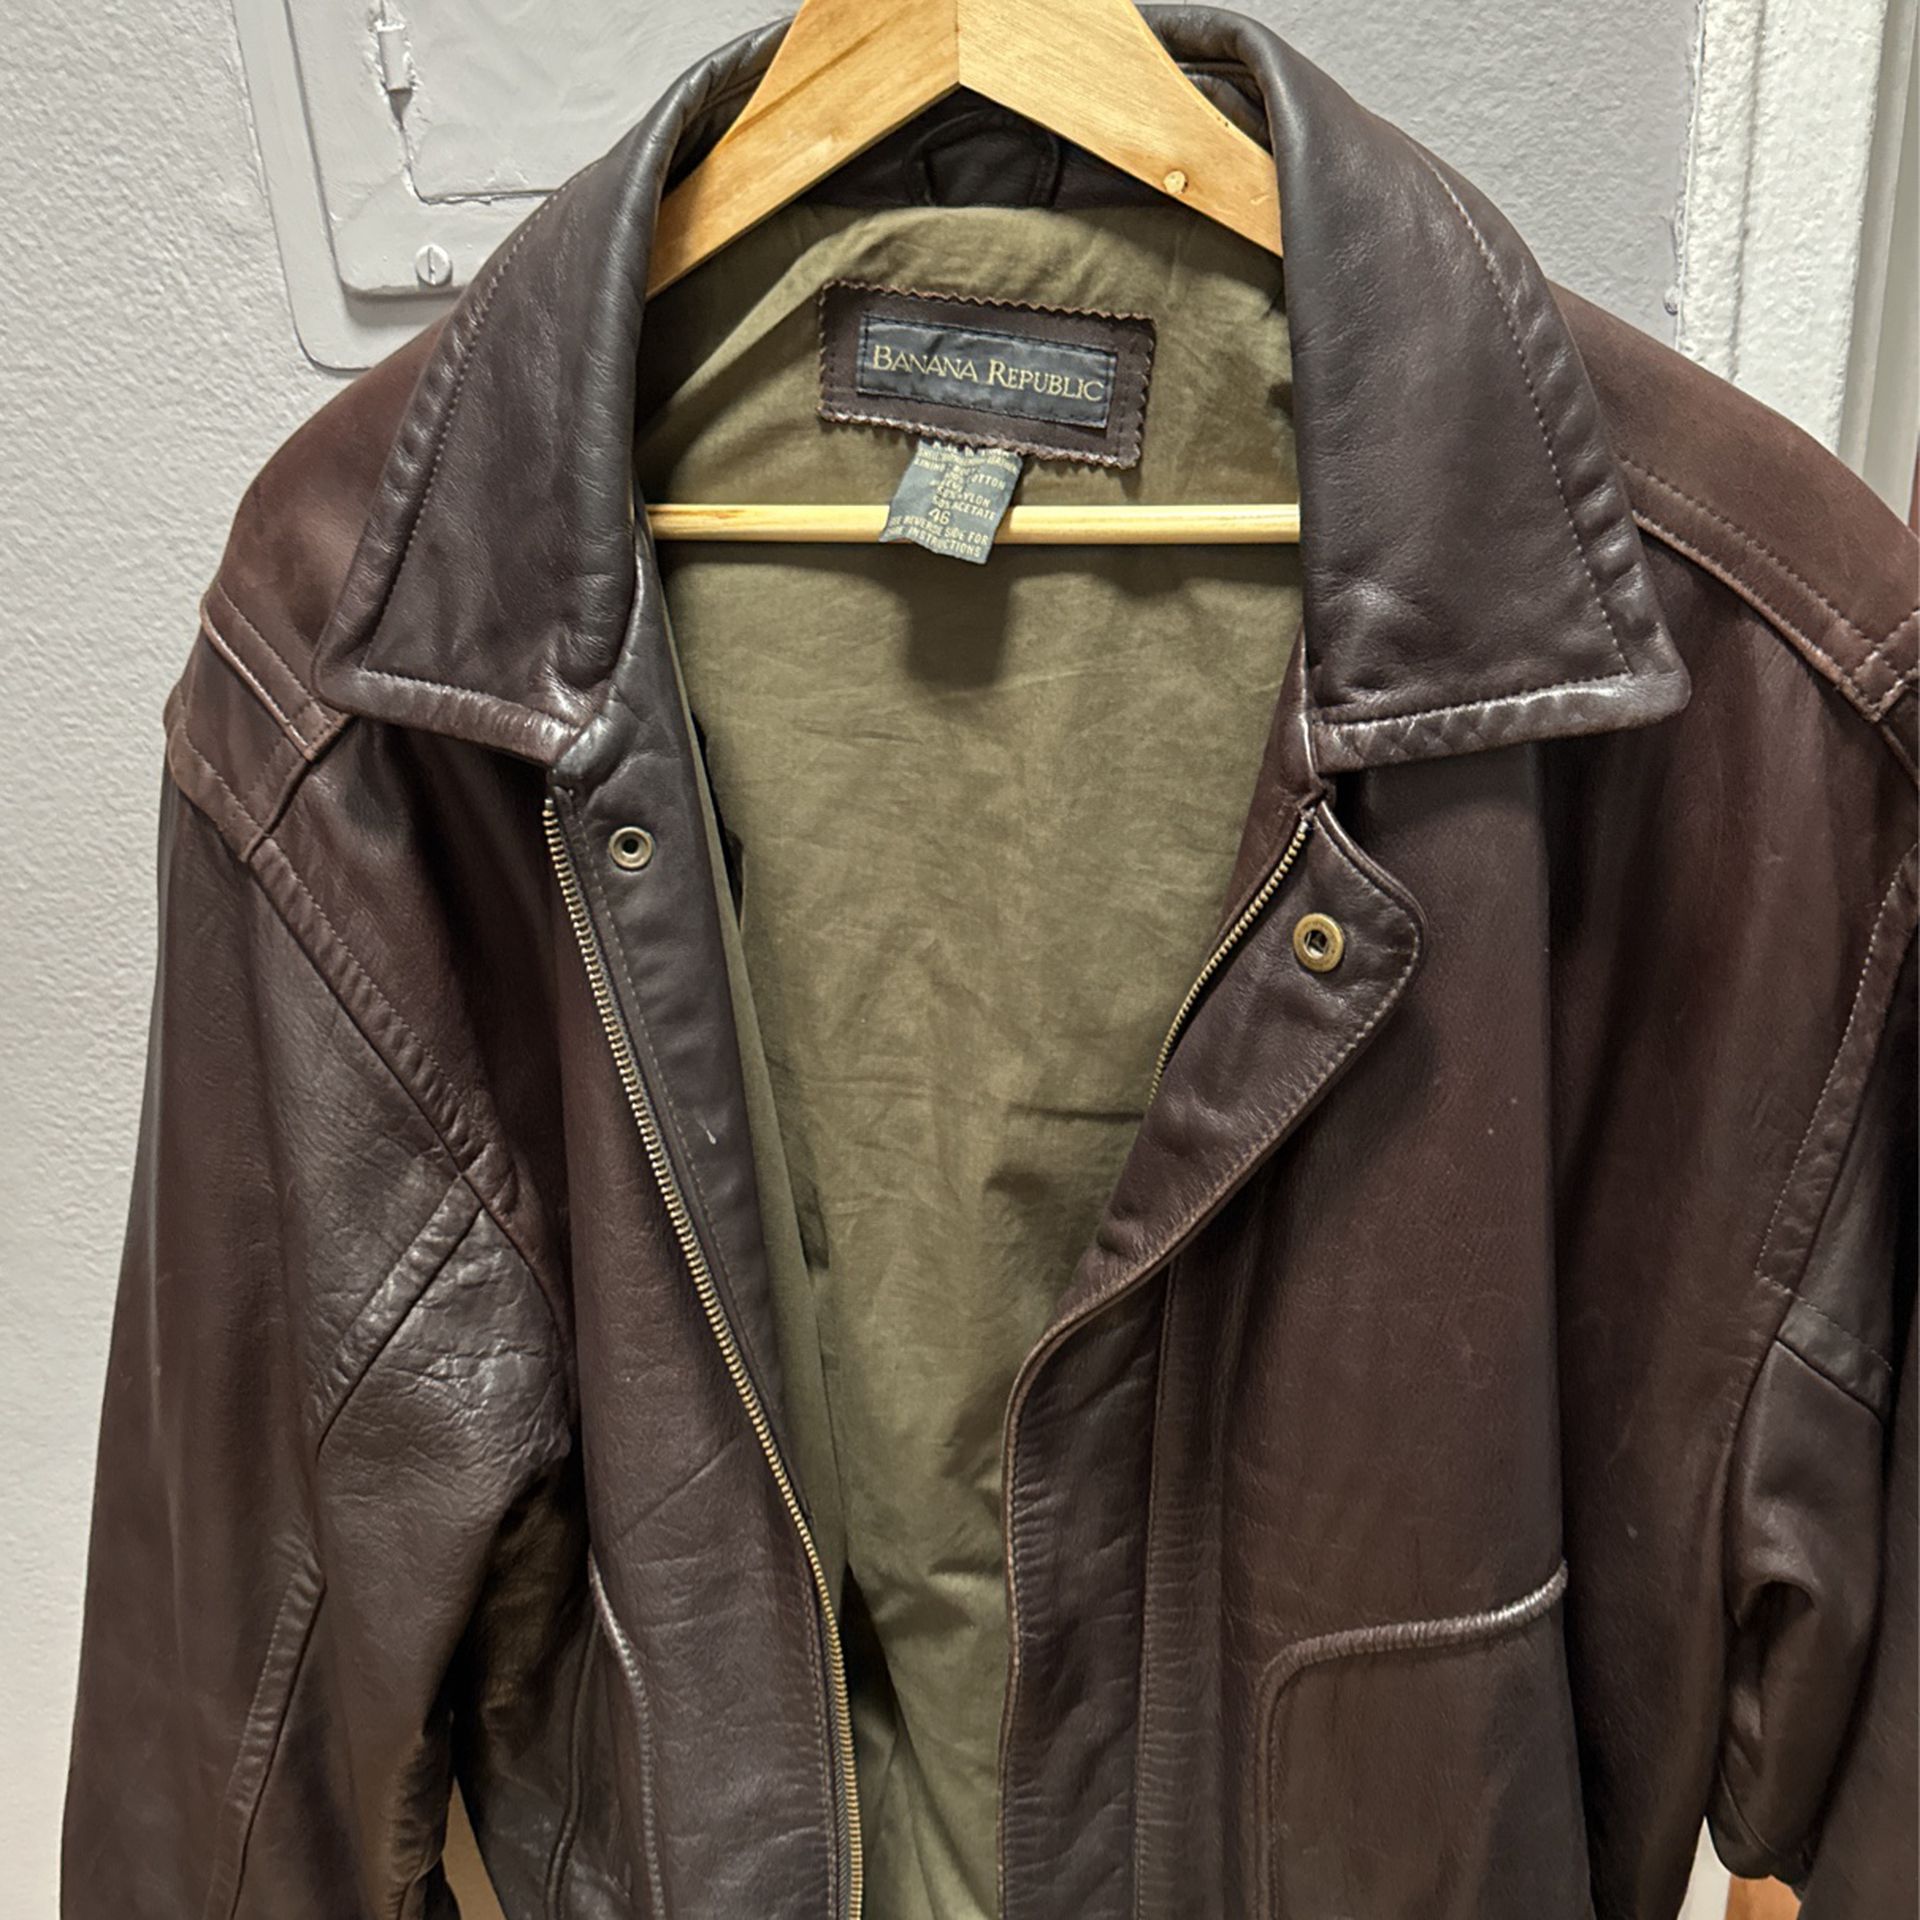 Bomber Jacket, Brown Leather, Heavy Size 46, Large